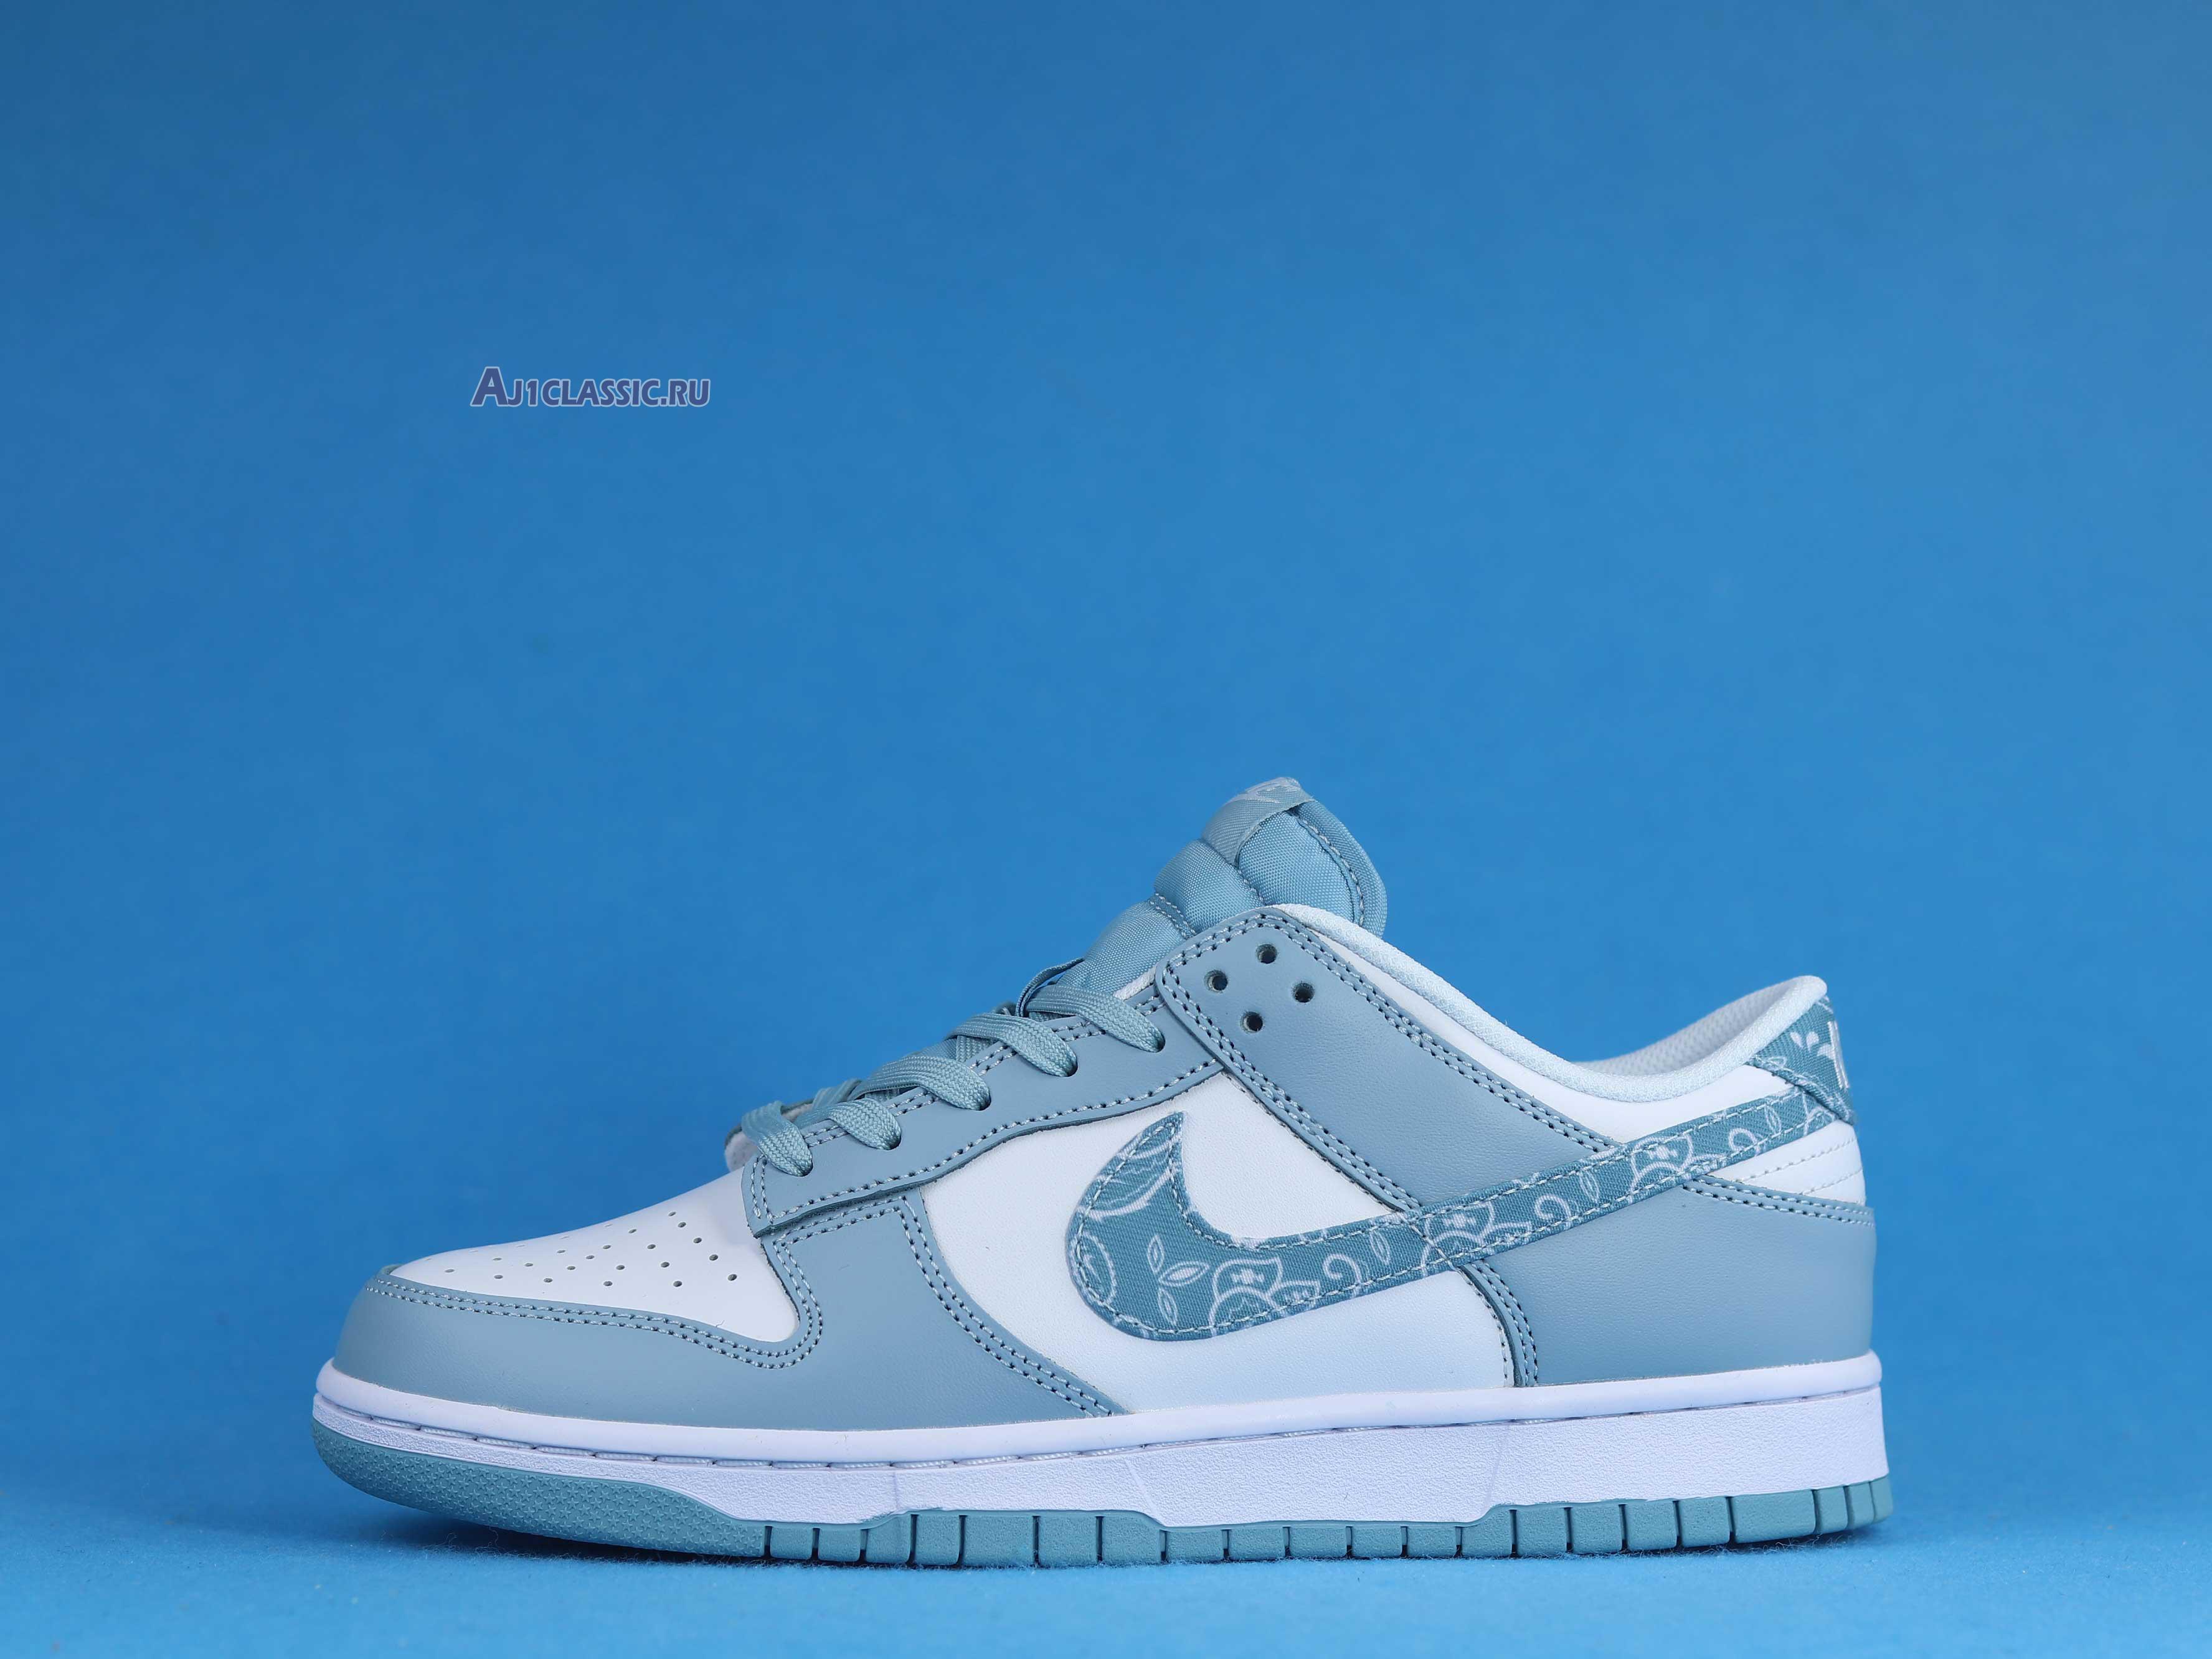 Nike Dunk Low "Blue Paisley" DH4401-101